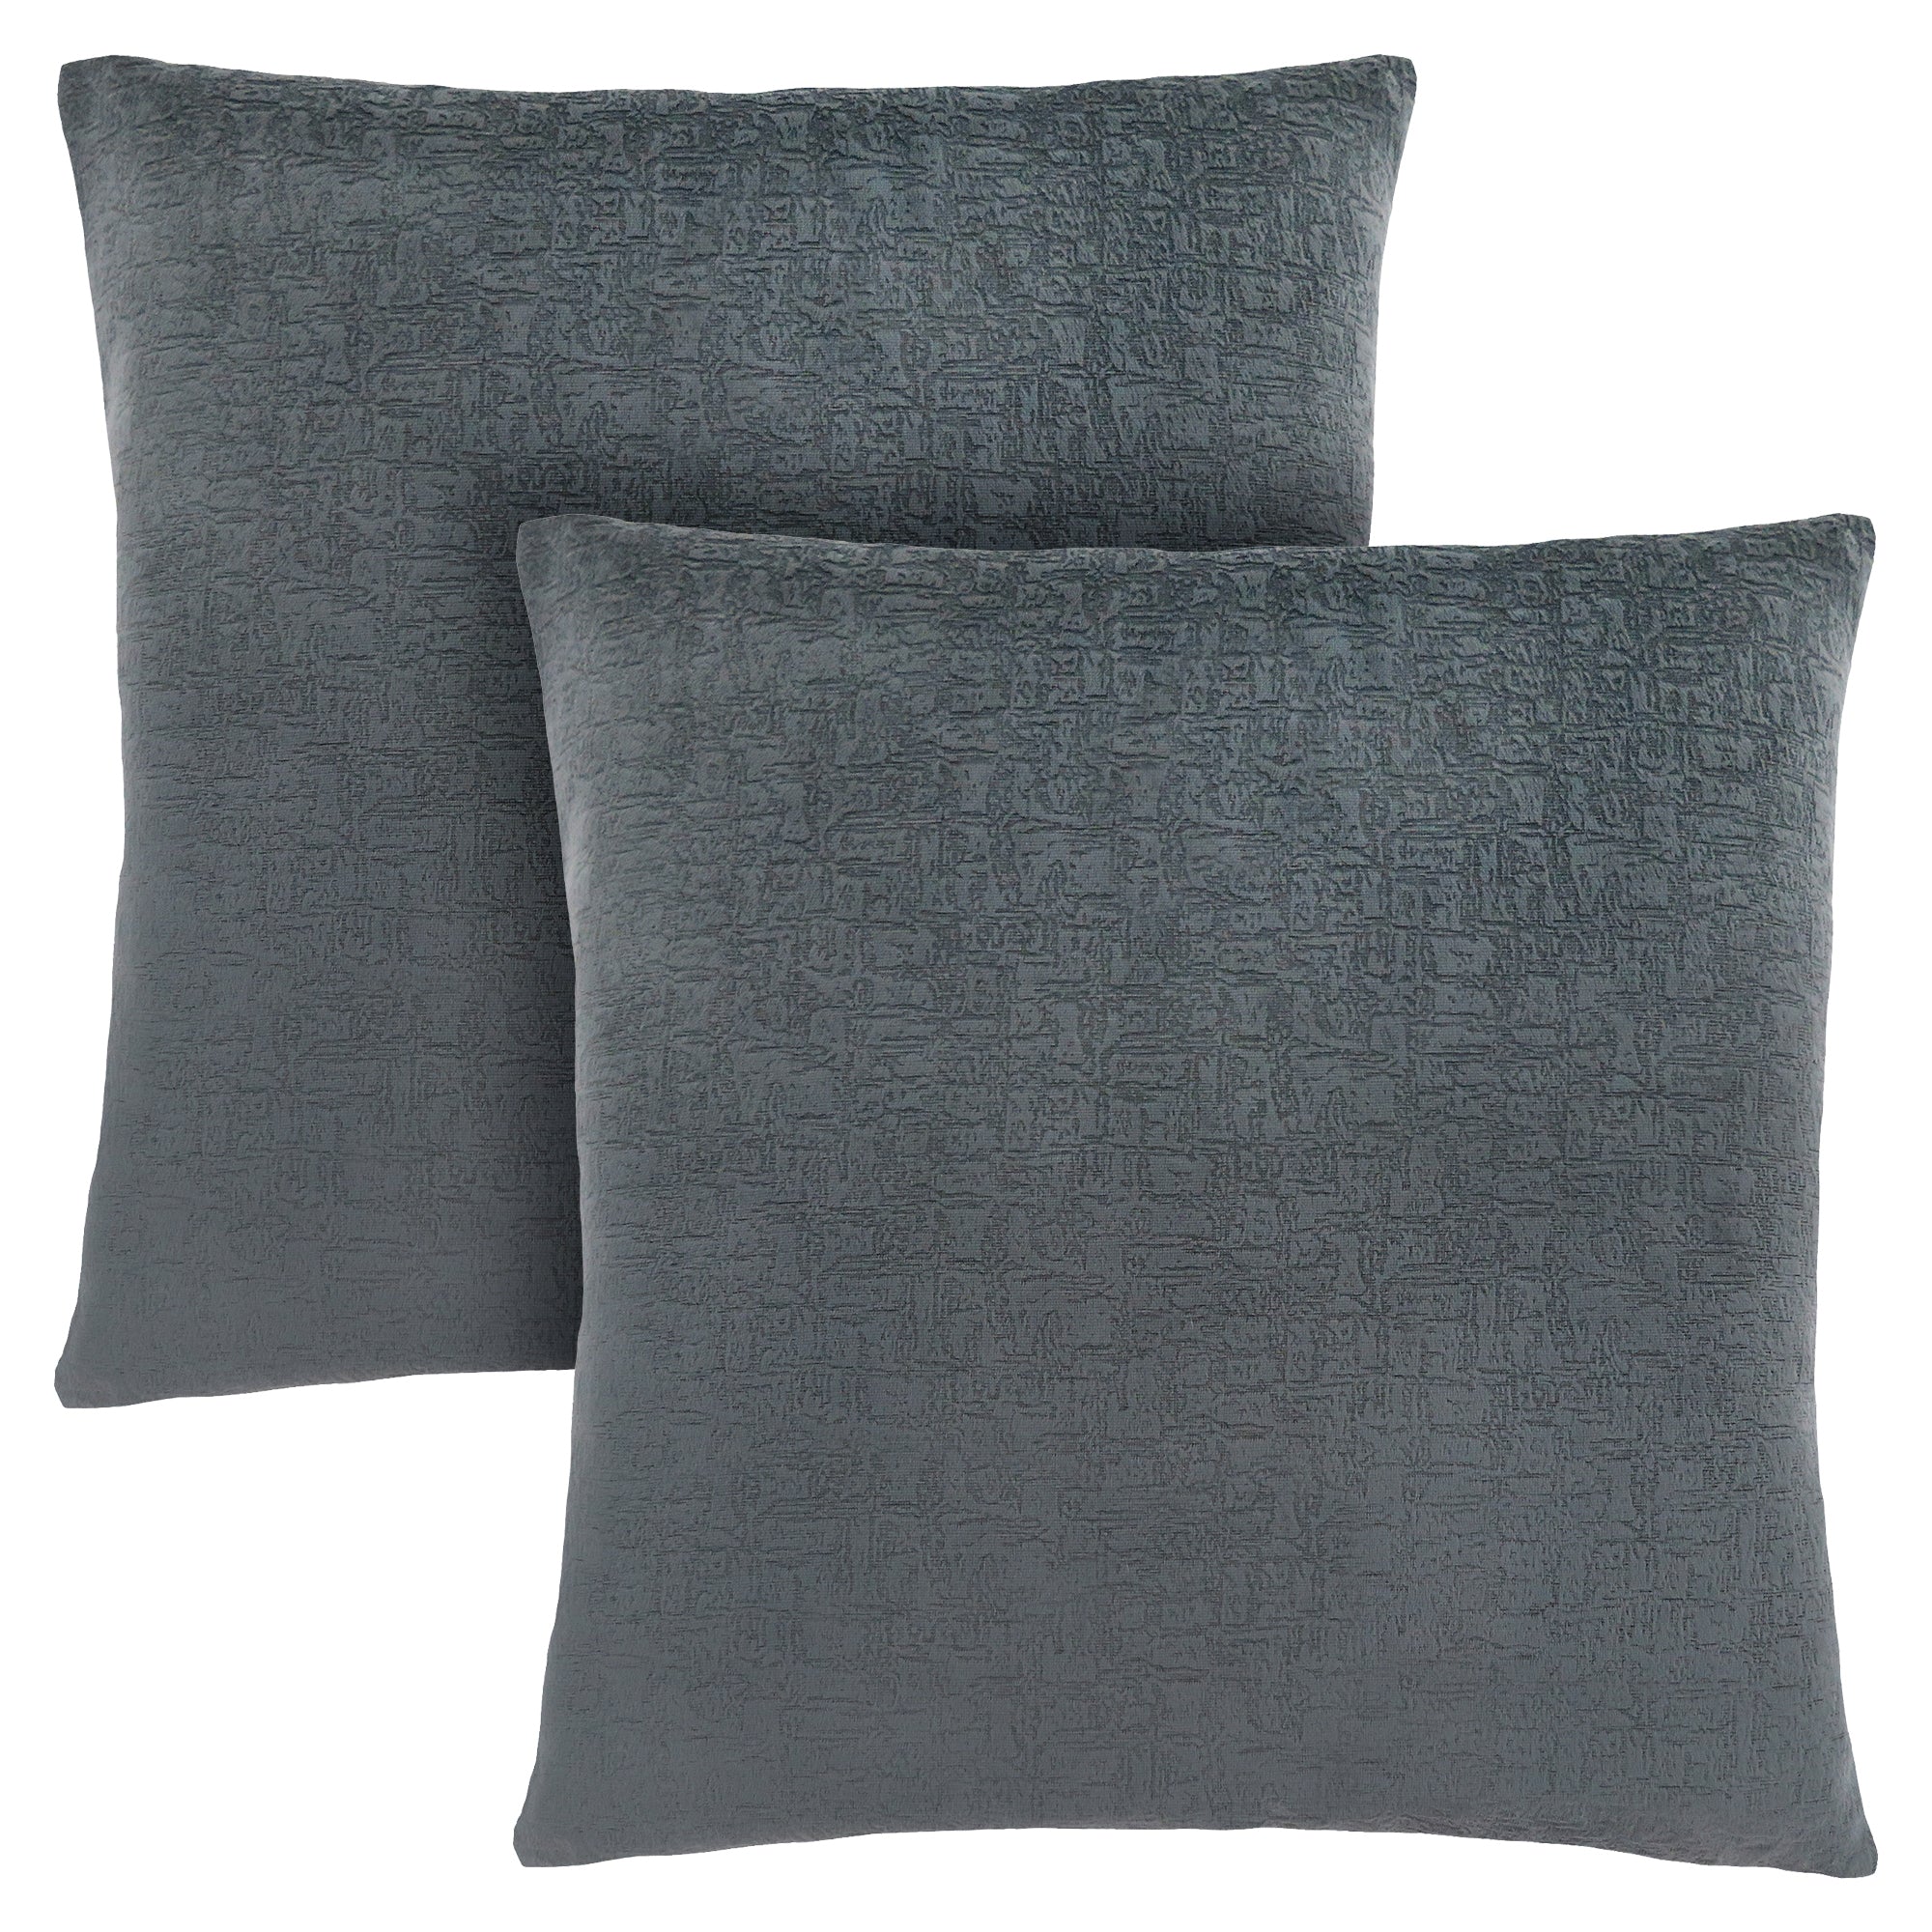 MN-739275    Pillows, Set Of 2, 18 X 18 Square, Insert Included, Decorative Throw, Accent, Sofa, Couch, Bed, Plush Velvet Finish, Soft Polyester Fabric, Hypoallergenic Soft Polyester Insert, Dark Grey, Contemporary, Modern